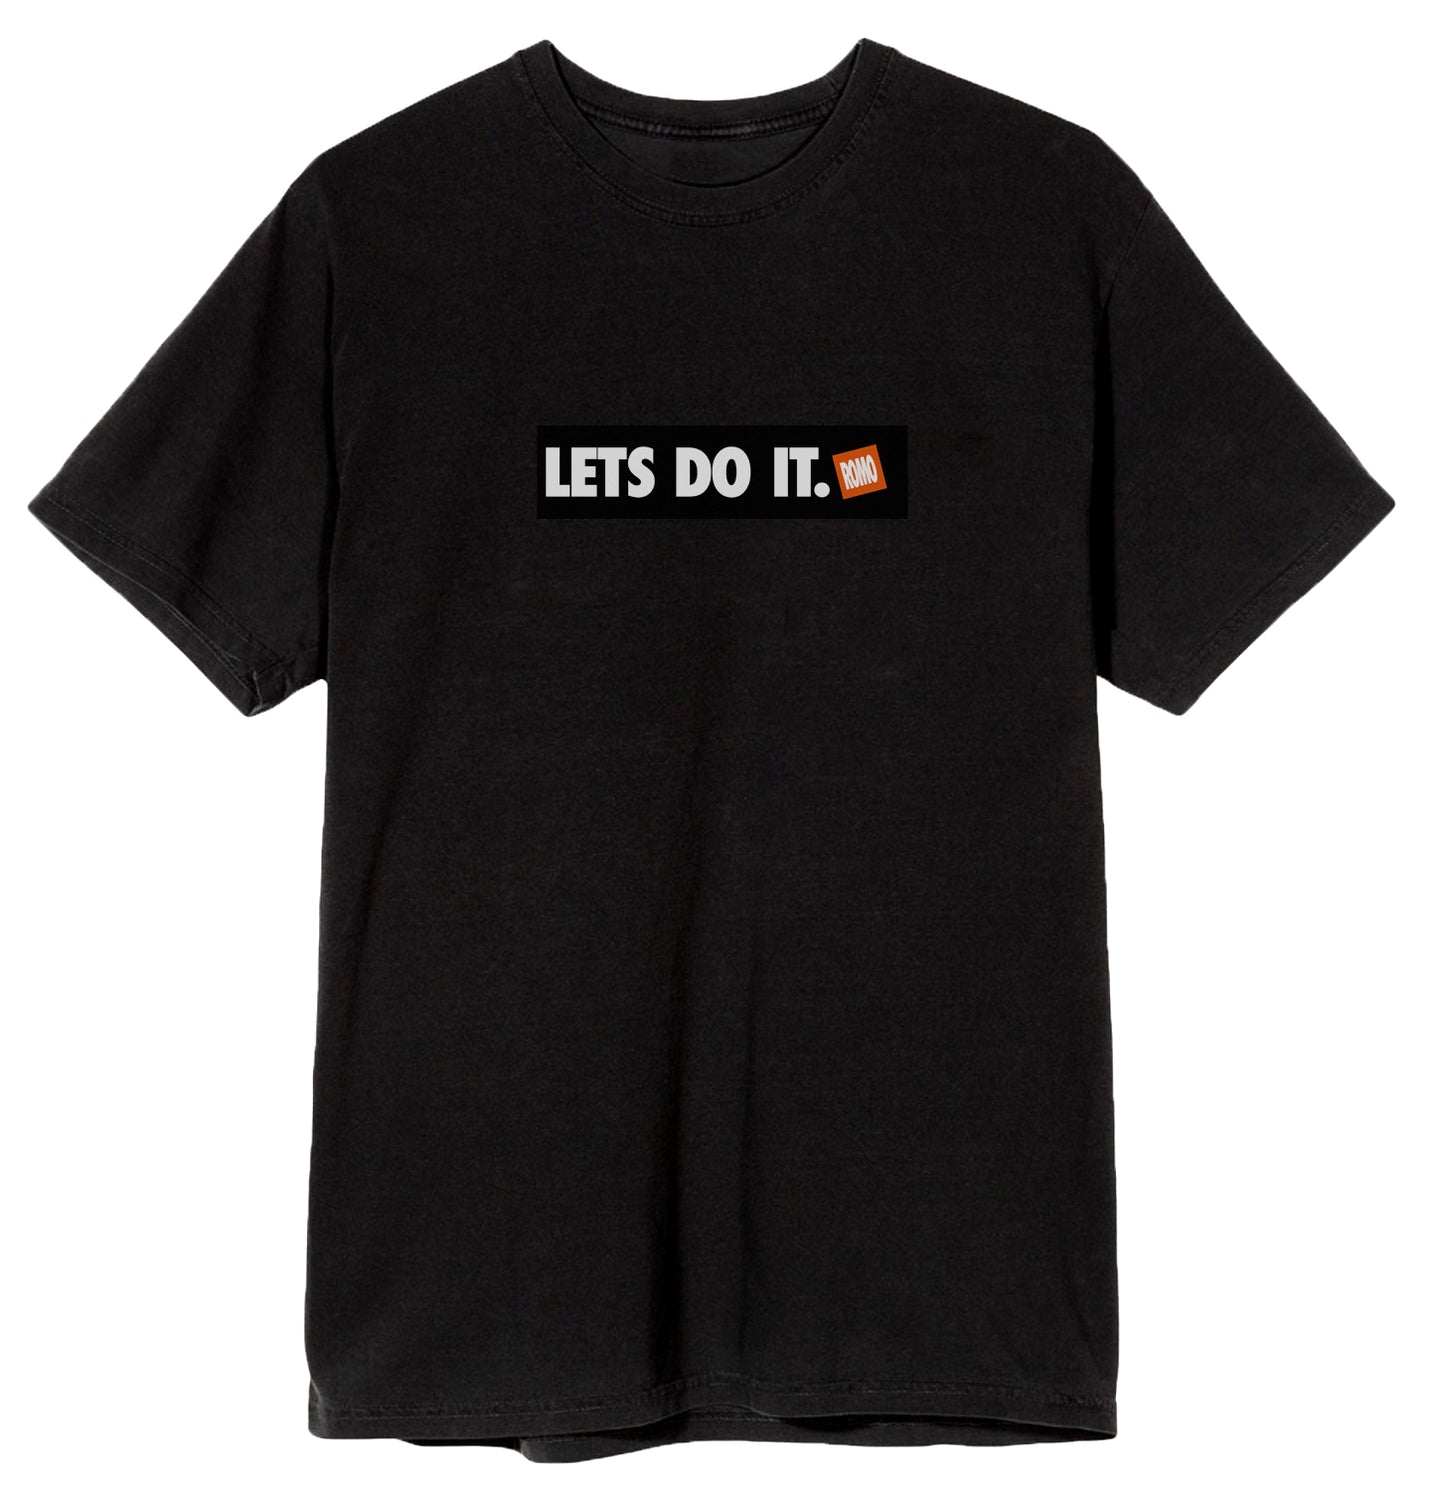 Lil Romo - Let's Do It Black Tee + Download